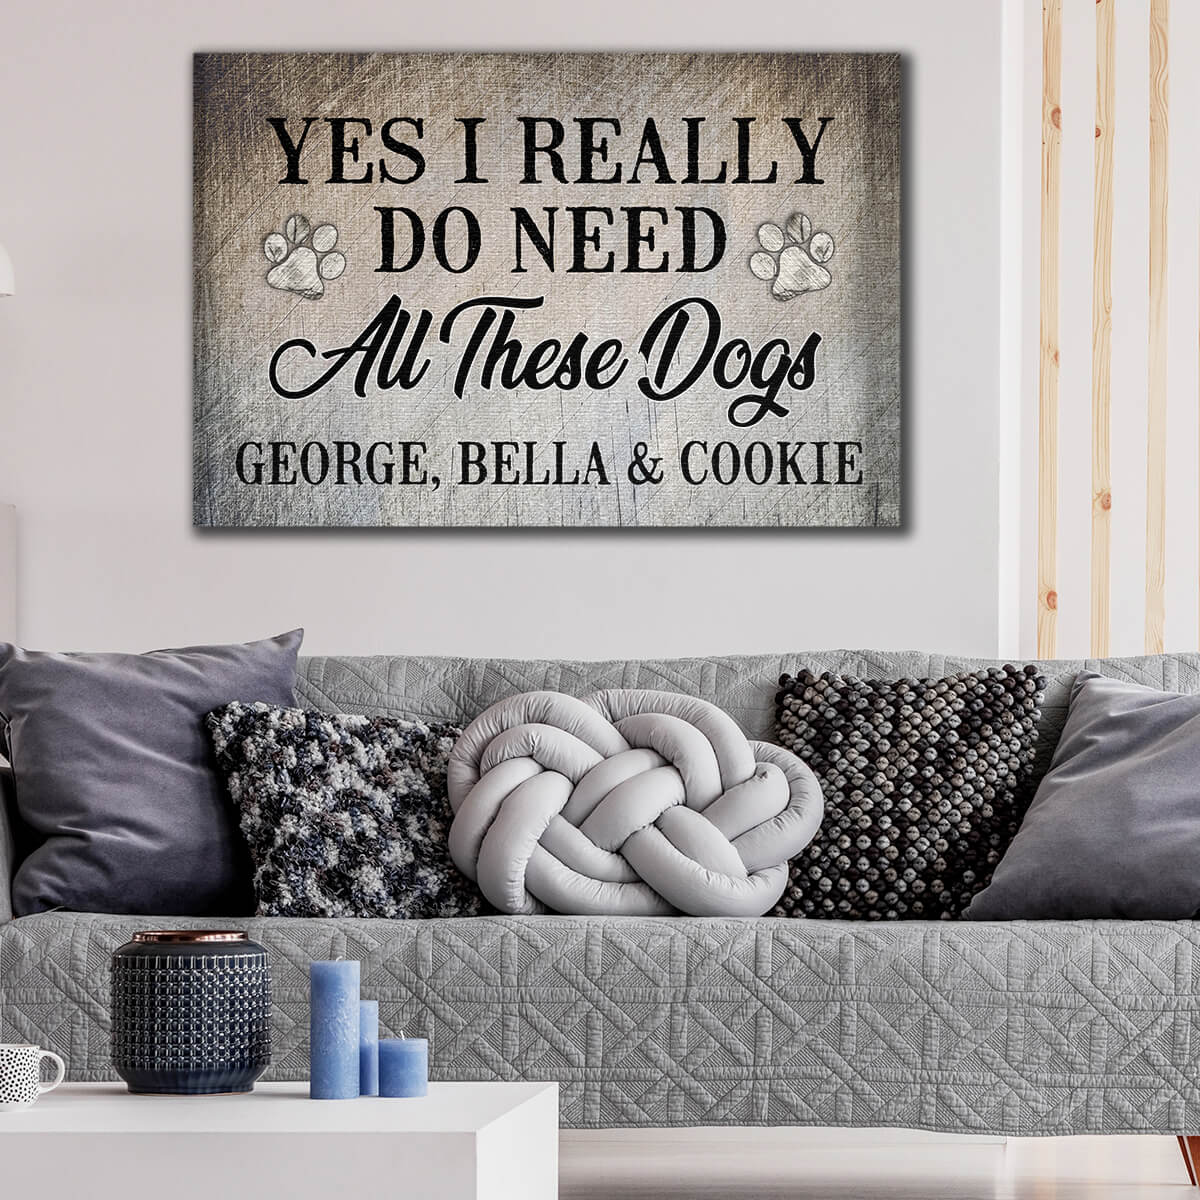 Personalized "All These Dogs" Premium Canvas